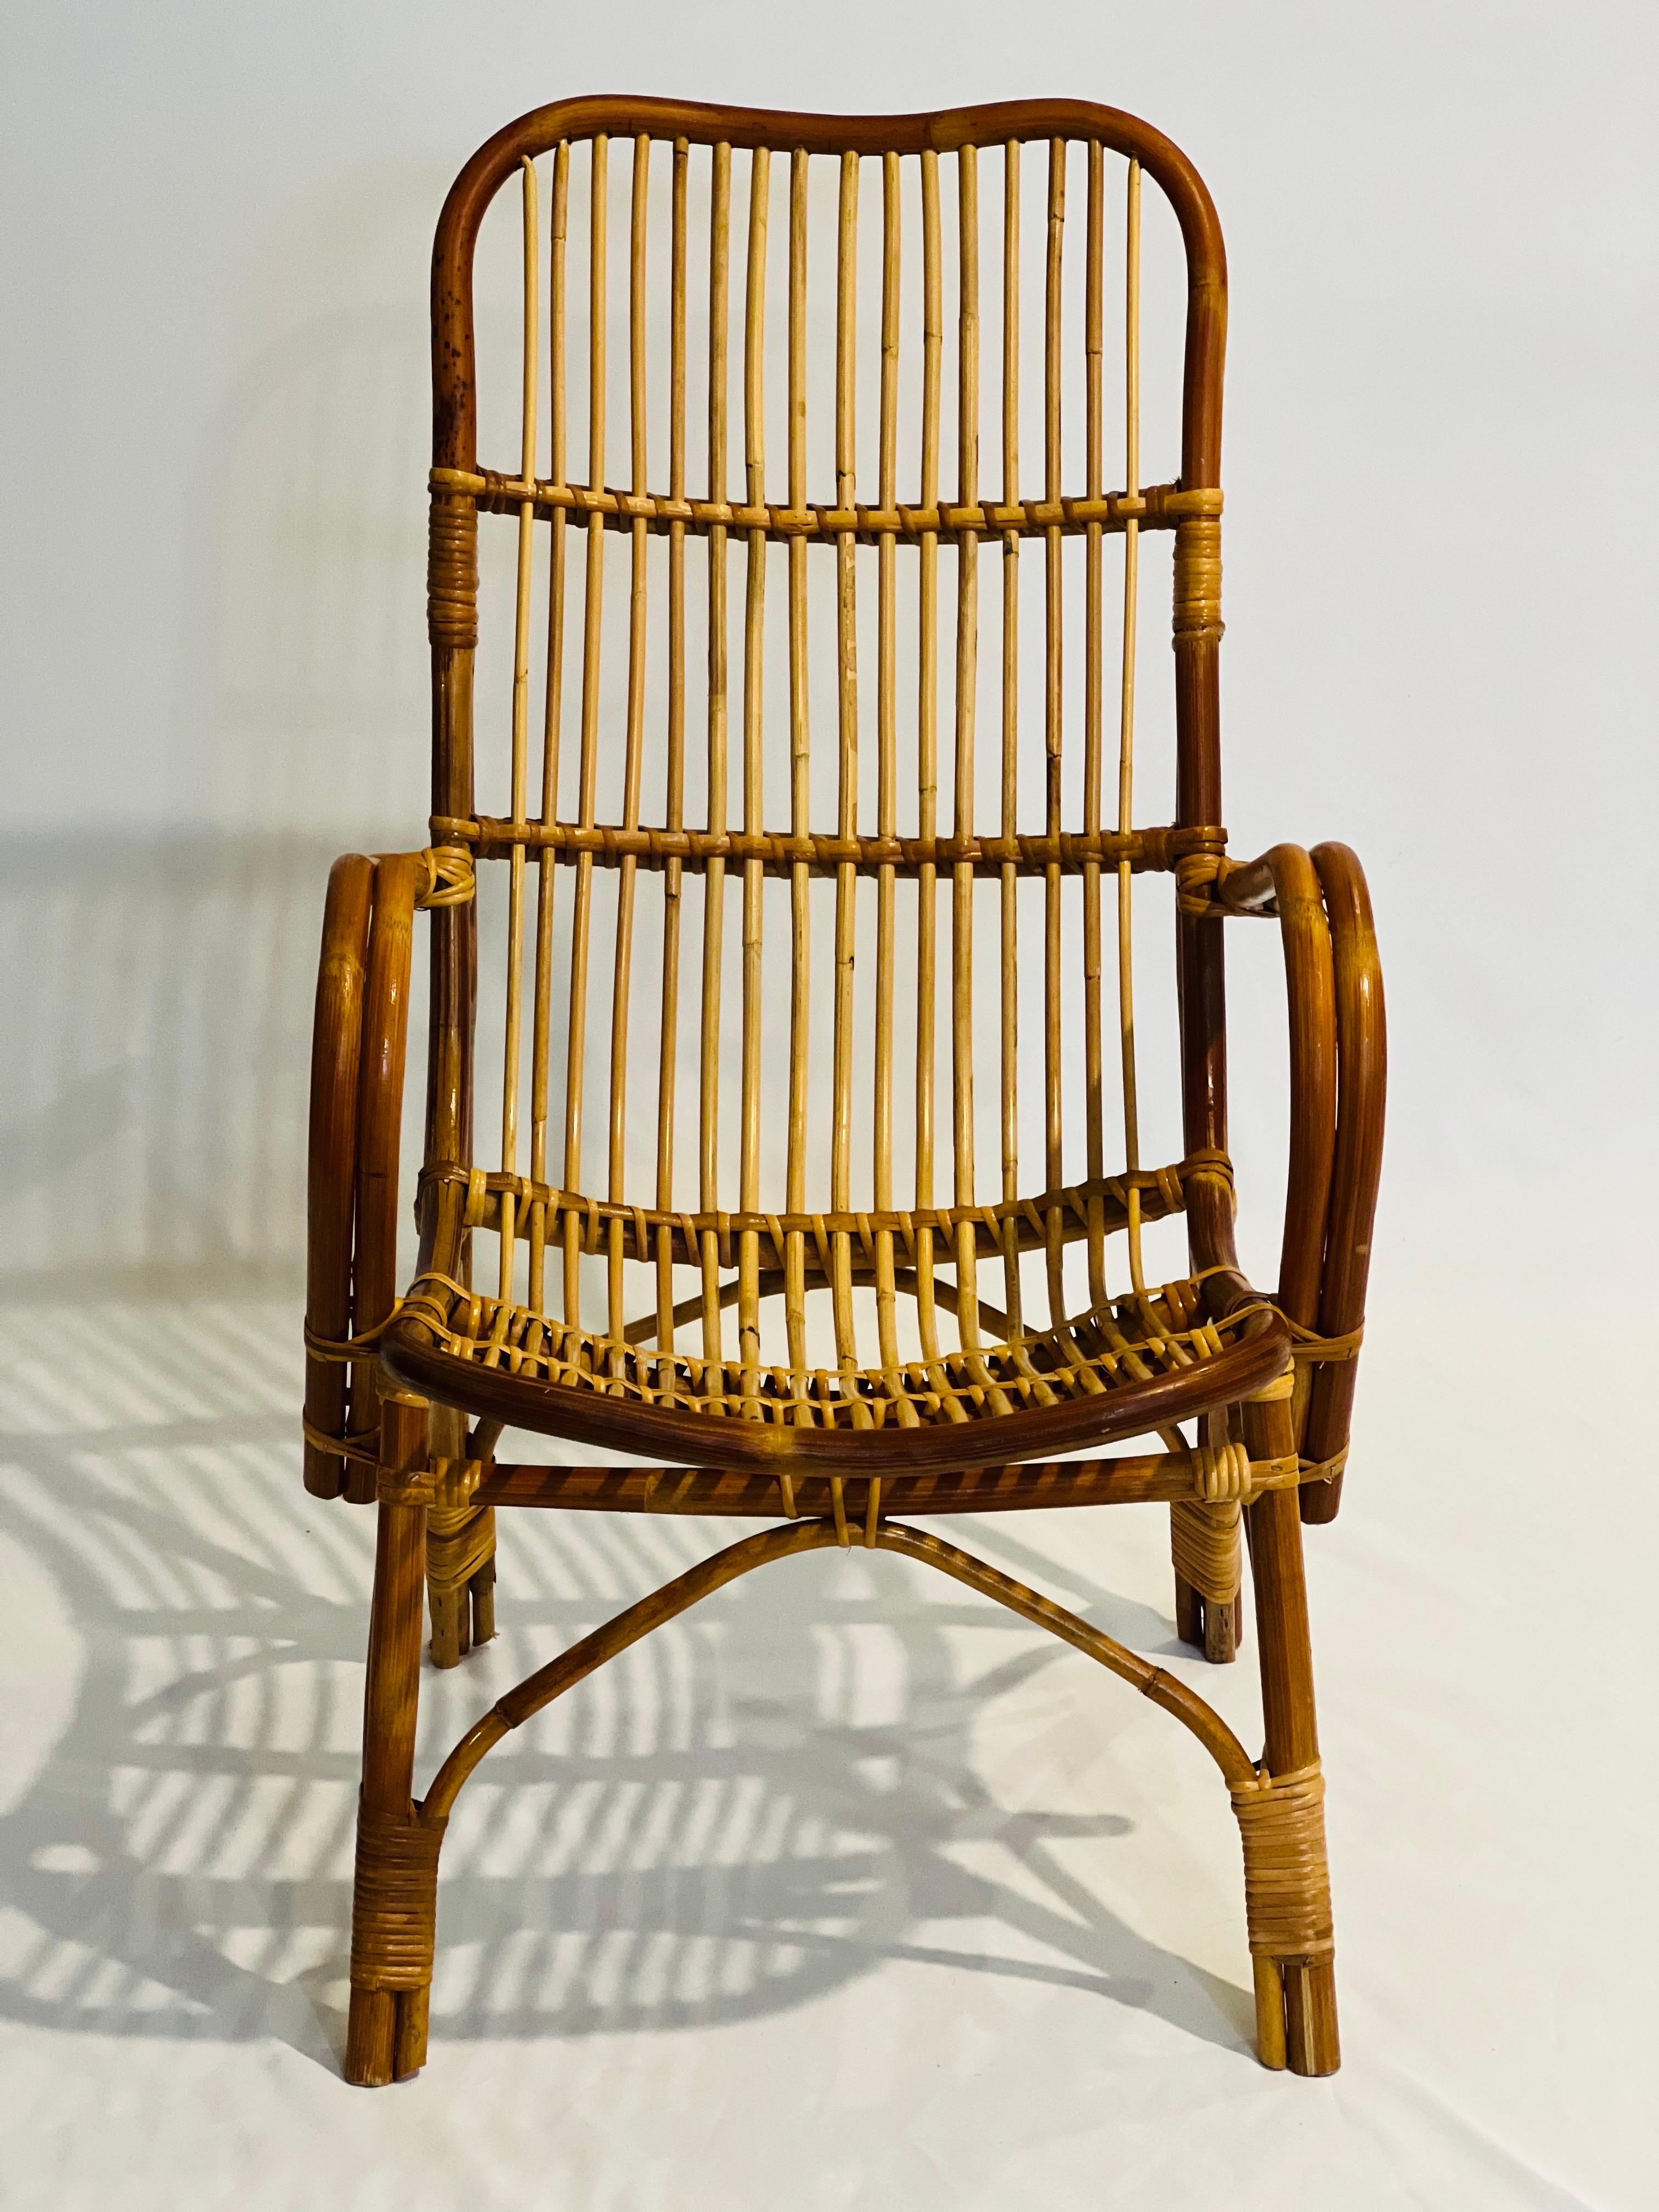 Vintage Albini style bamboo and rattan child's lounge chair.

Adorable chair with classic boho chic vibes perfect for your little one to lounge in style. The chair is sturdy and in very good condition.